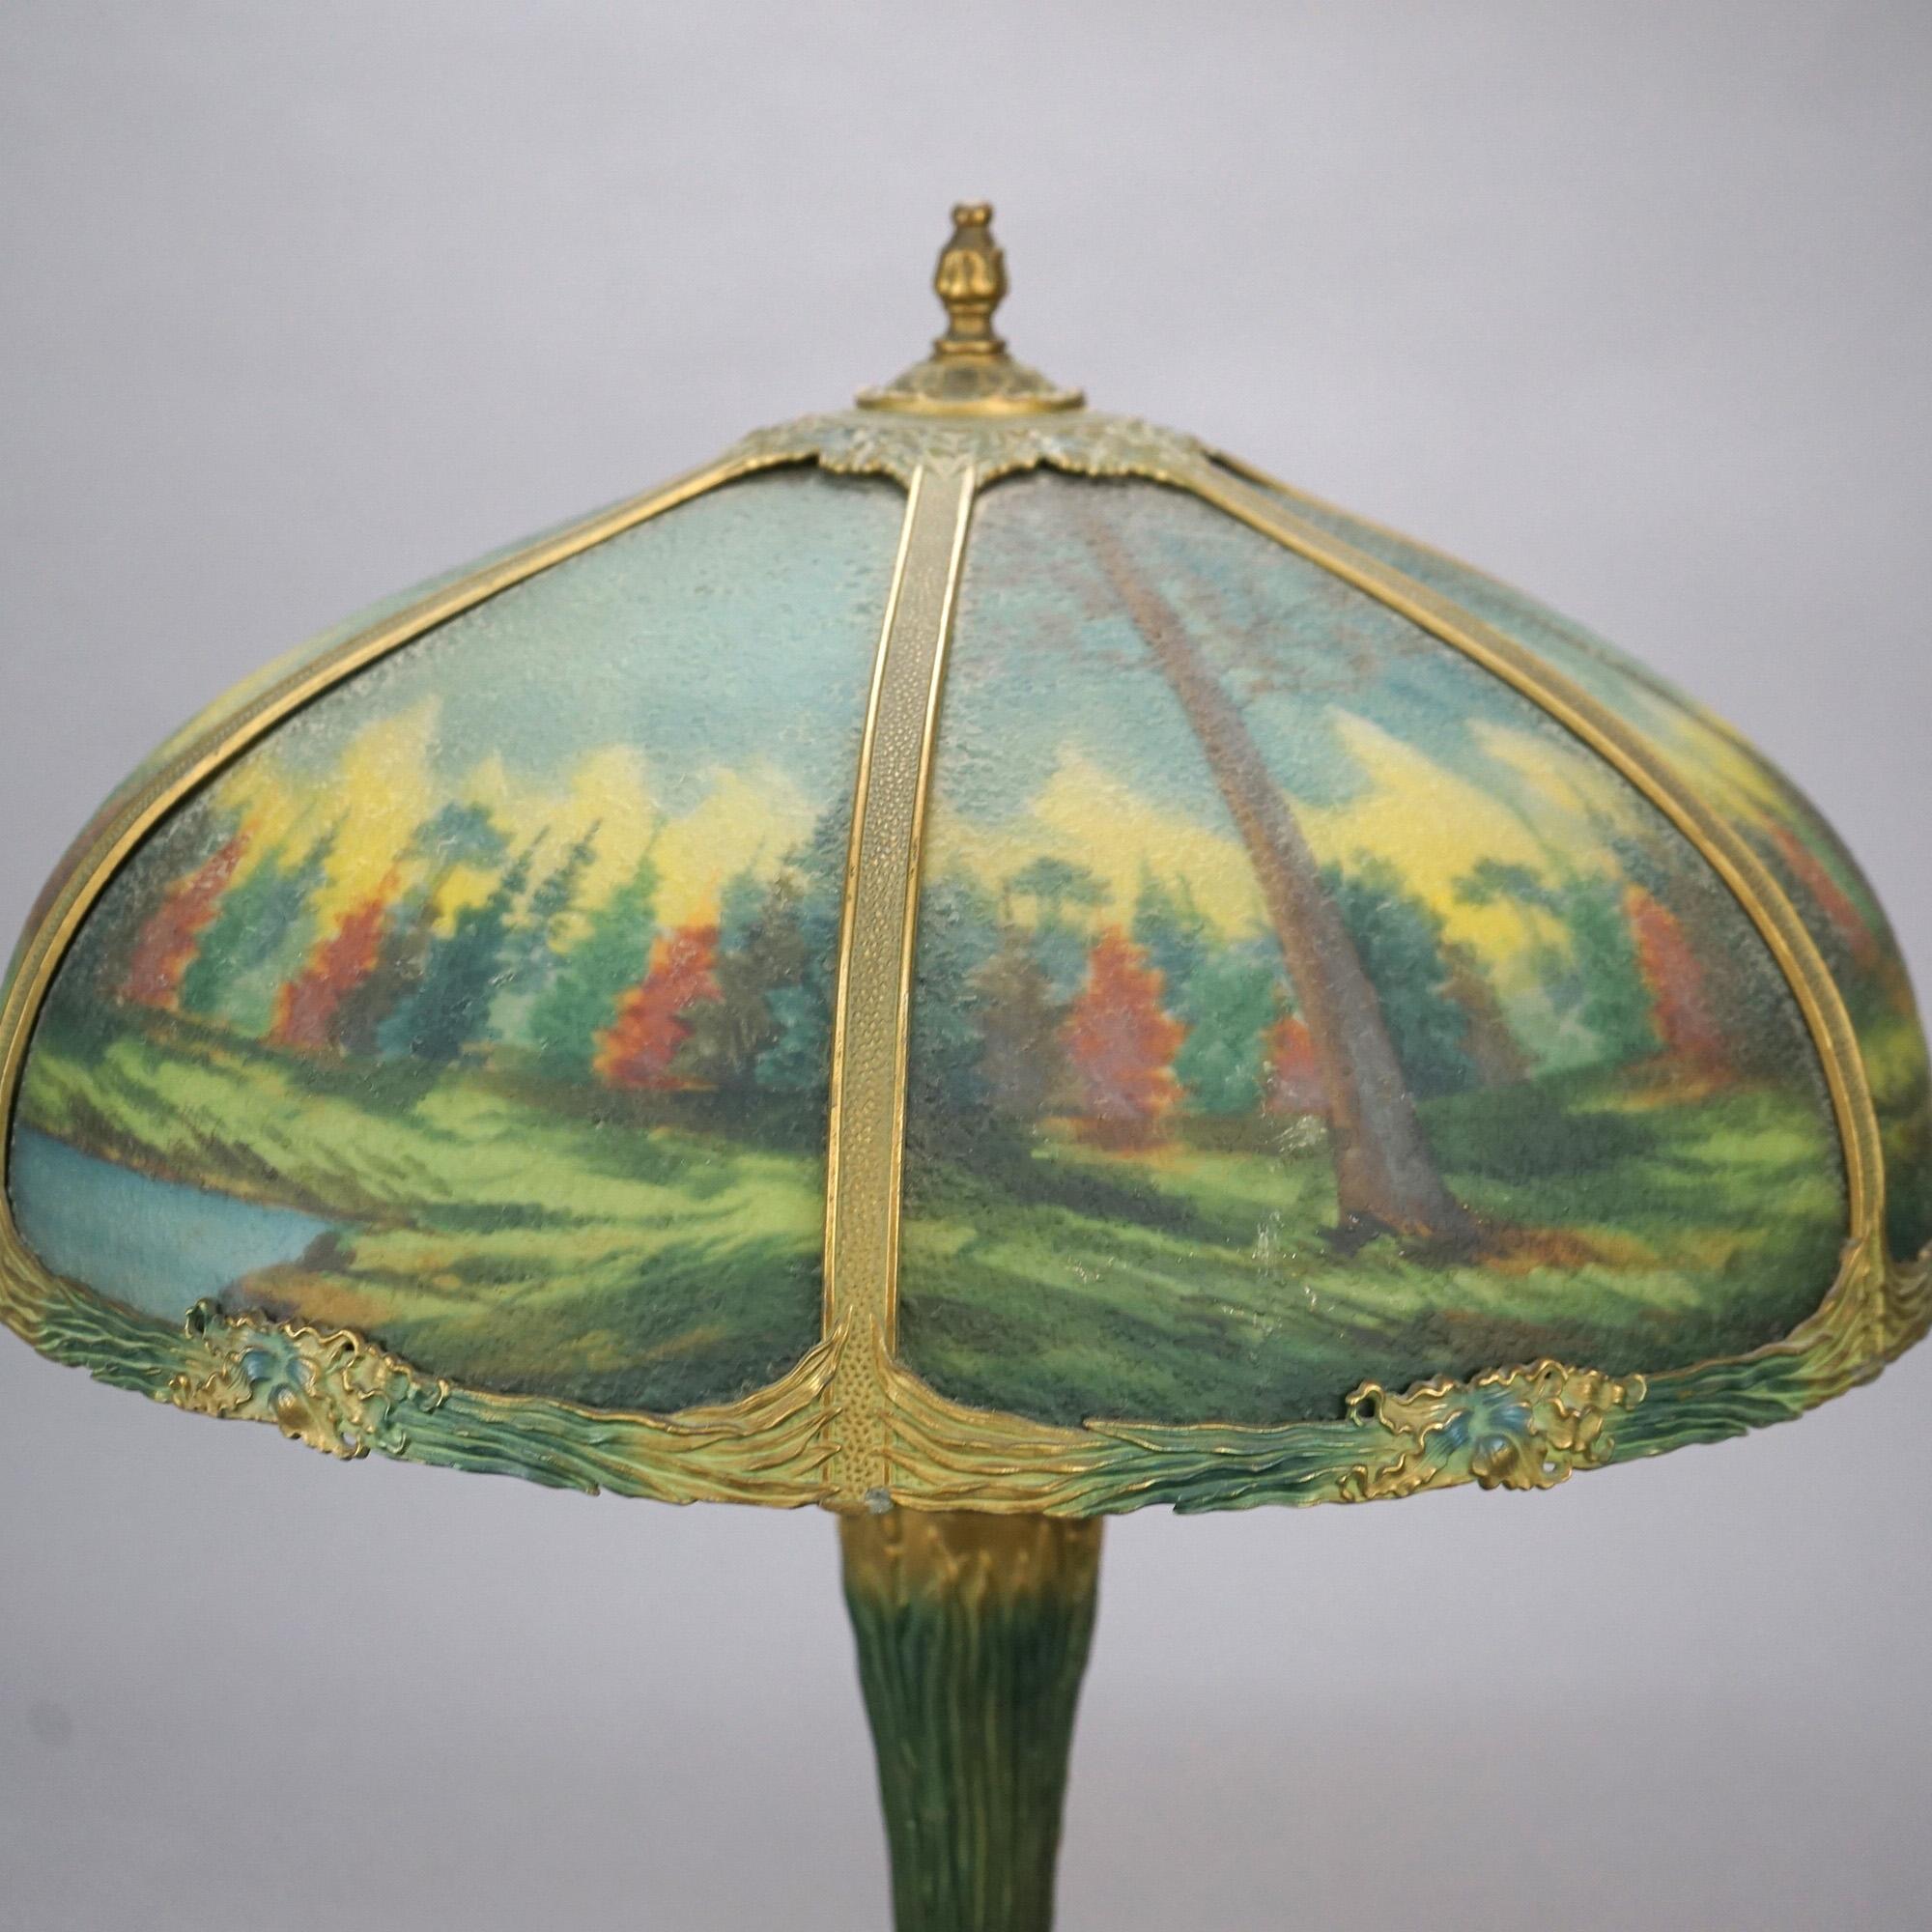  Antique Arts & Crafts Bradley & Hubbard Style Reverse Painted Lamp C1920 For Sale 3